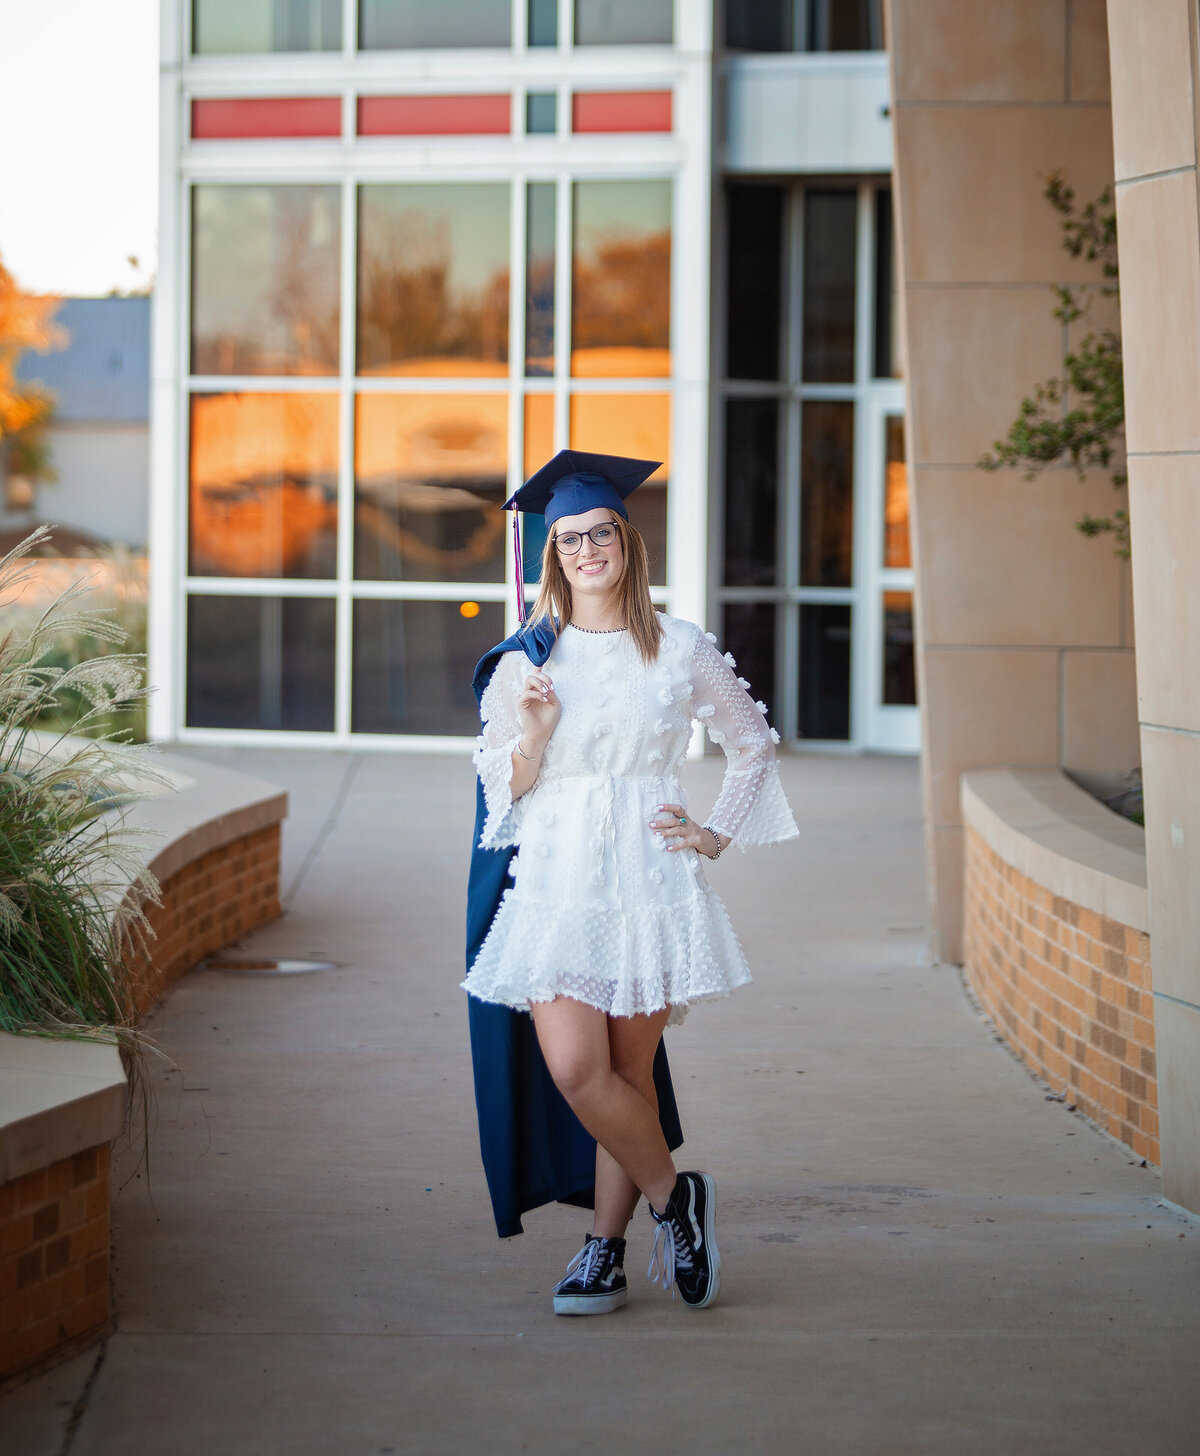 Senior girl at Plainview High School with Cap & Gown